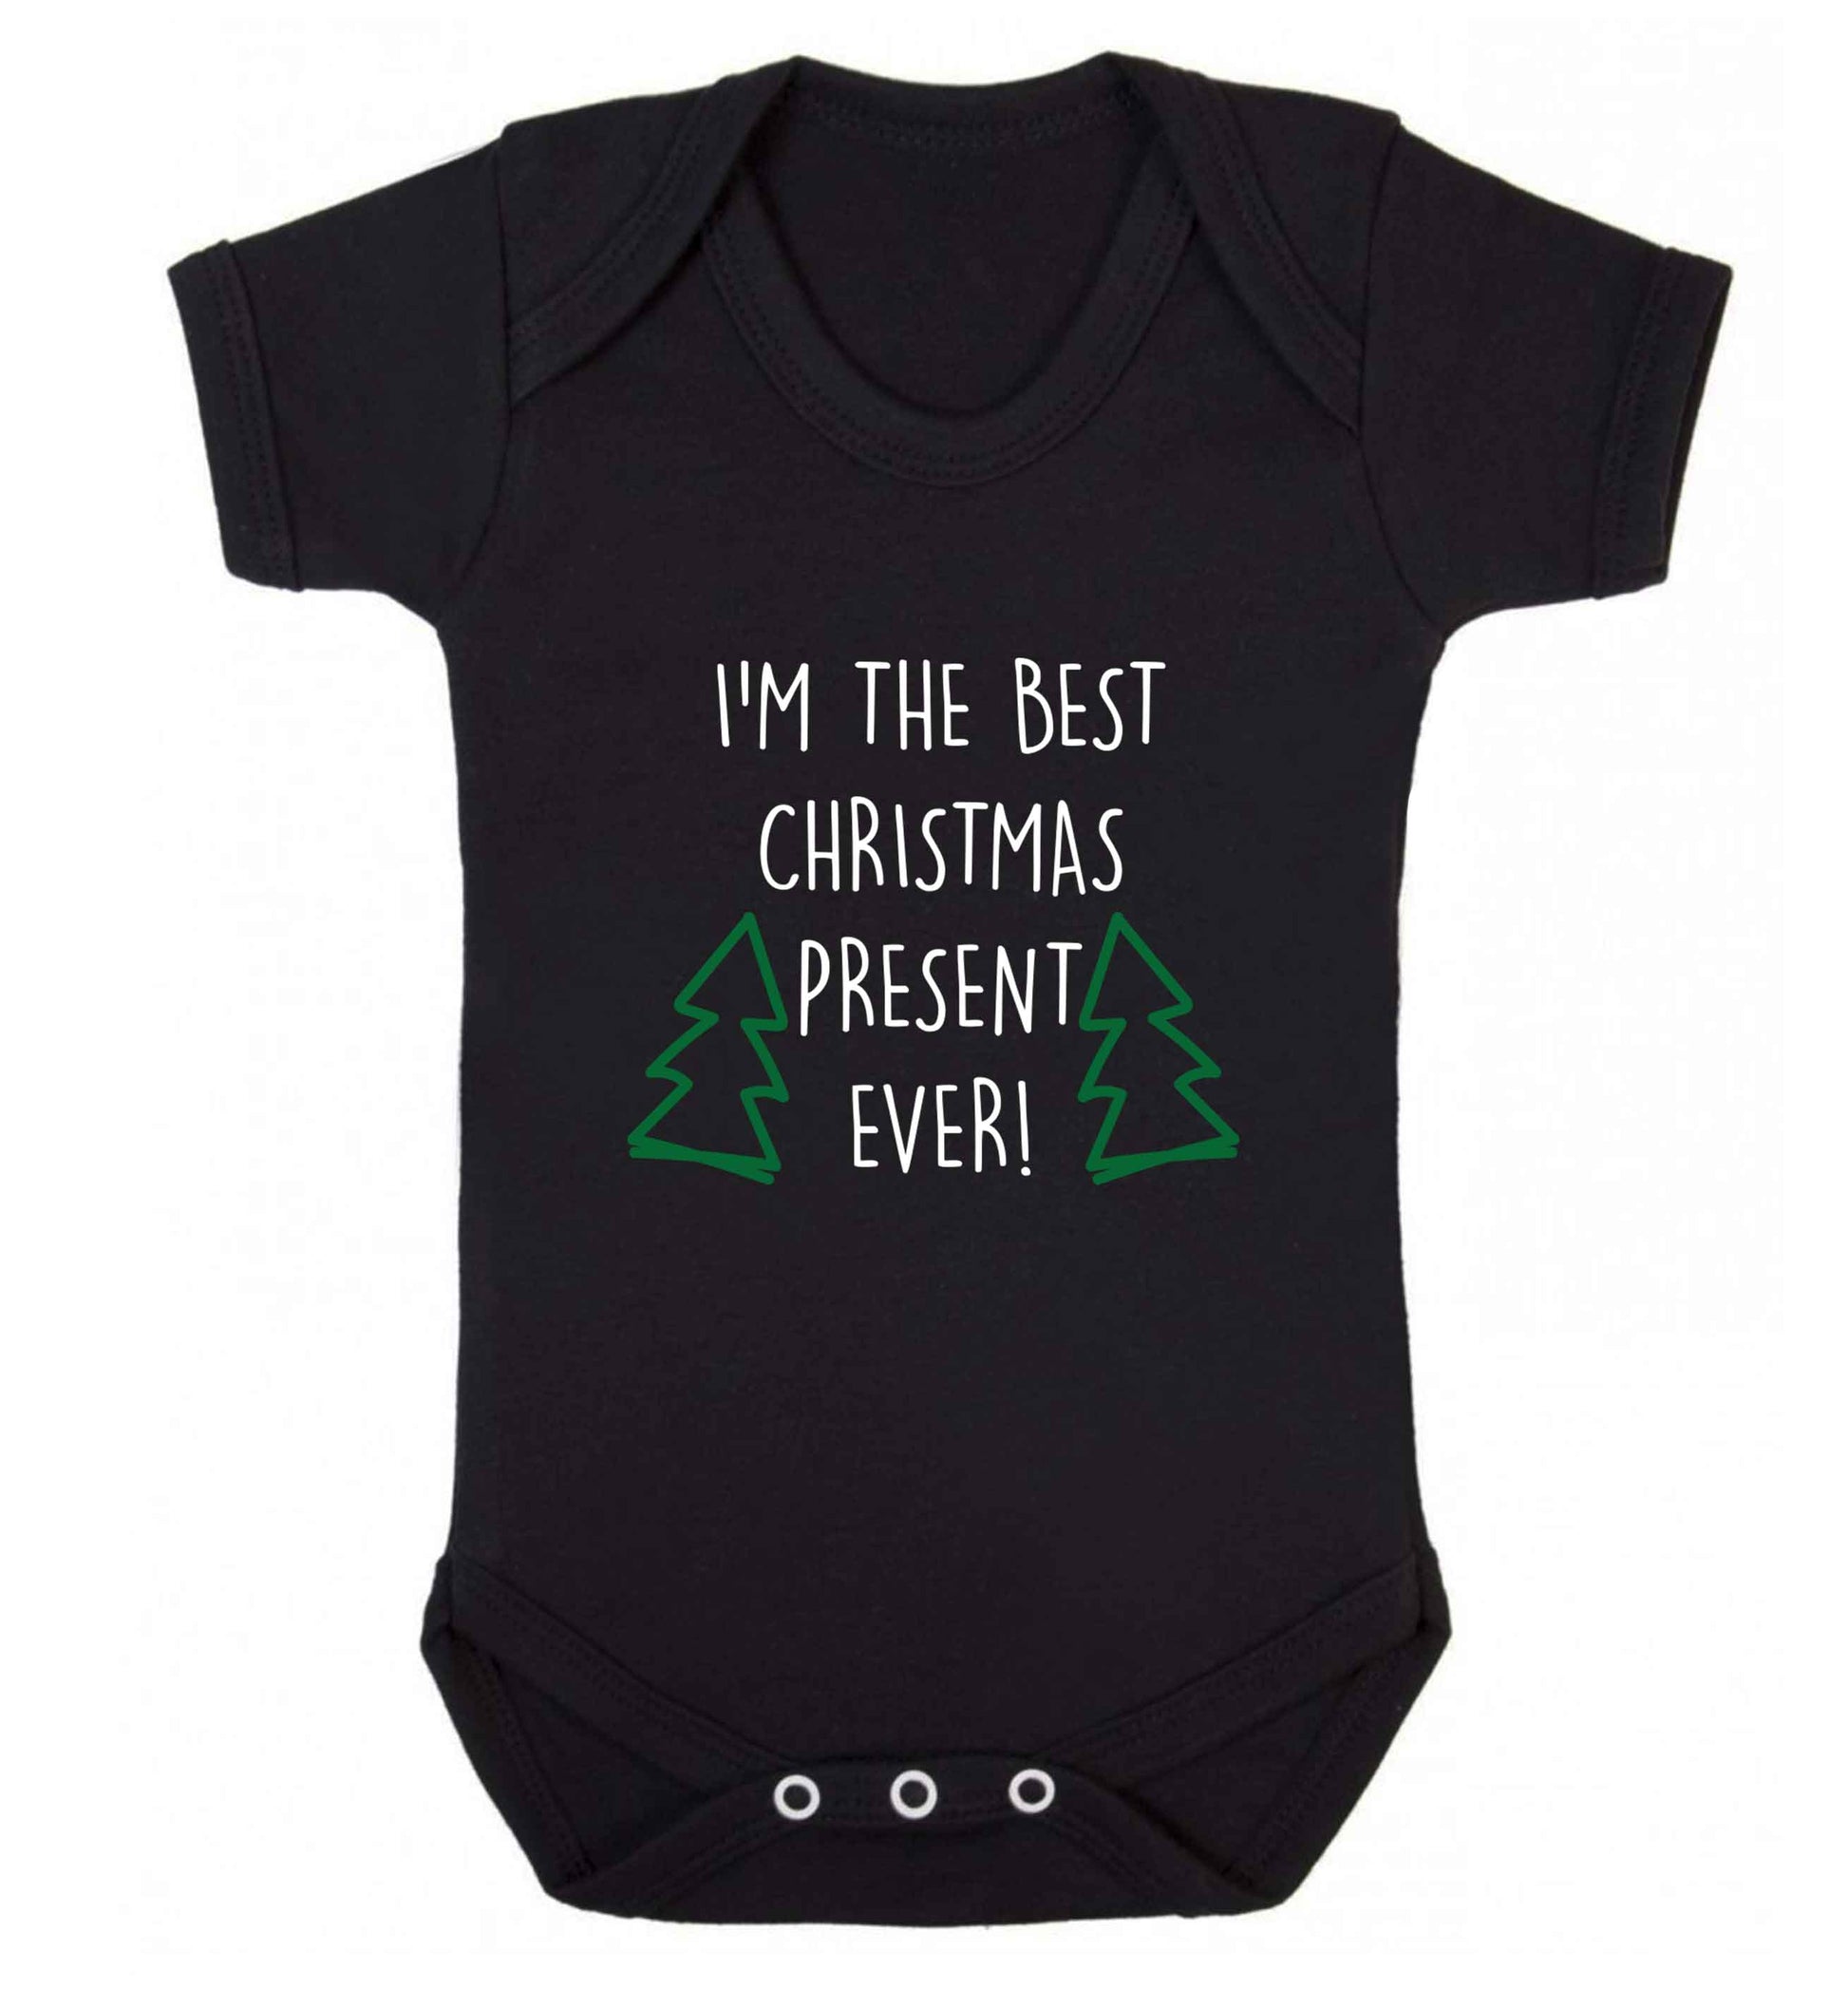 I'm the best Christmas present ever baby vest black 18-24 months